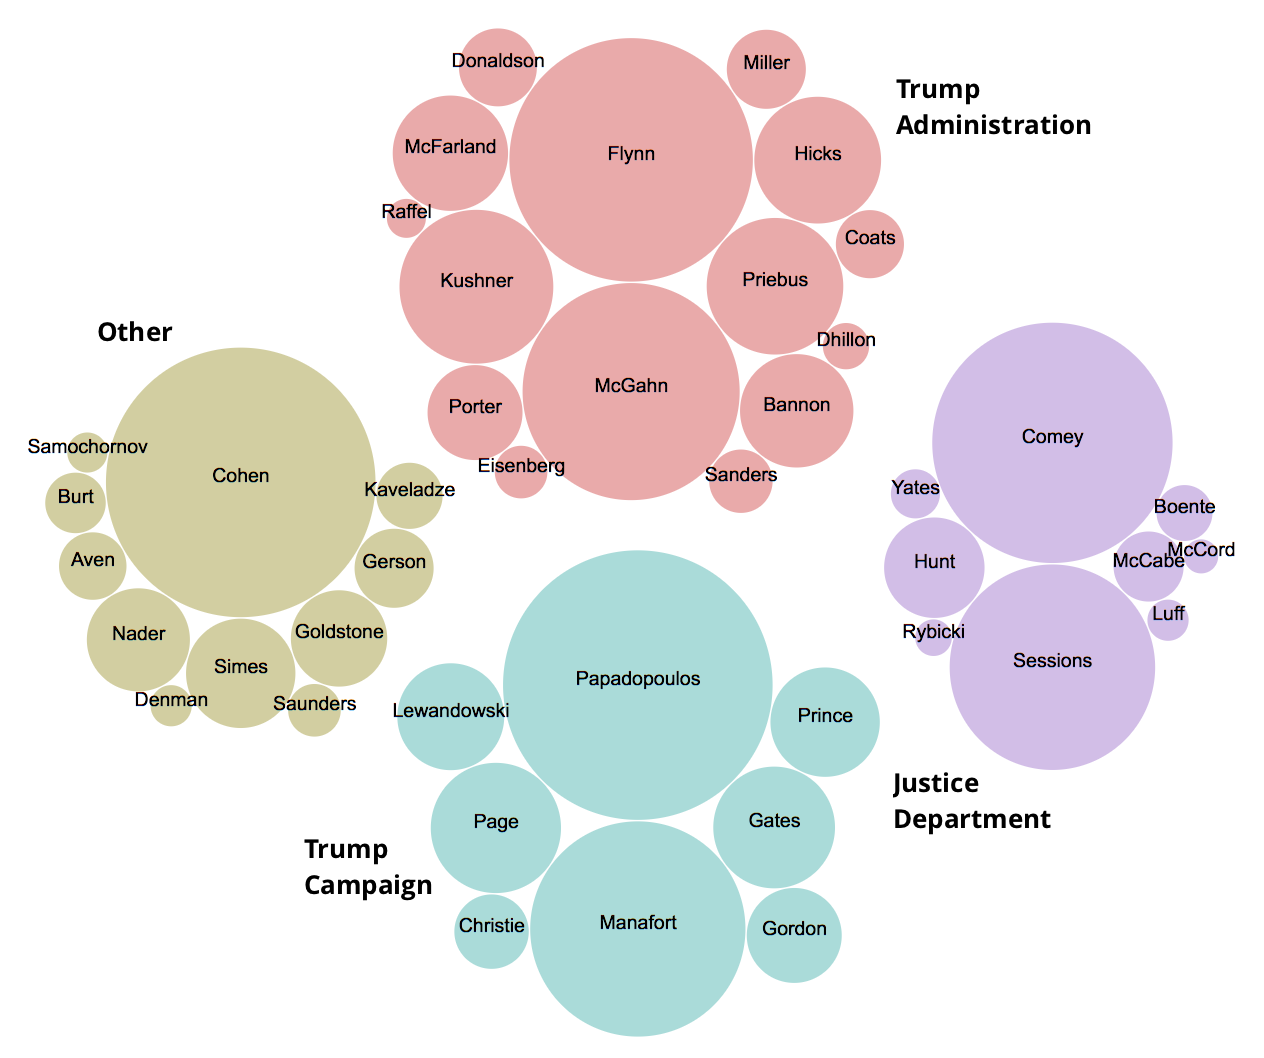 How to build a bubble chart of individuals mentioned in the Mueller report